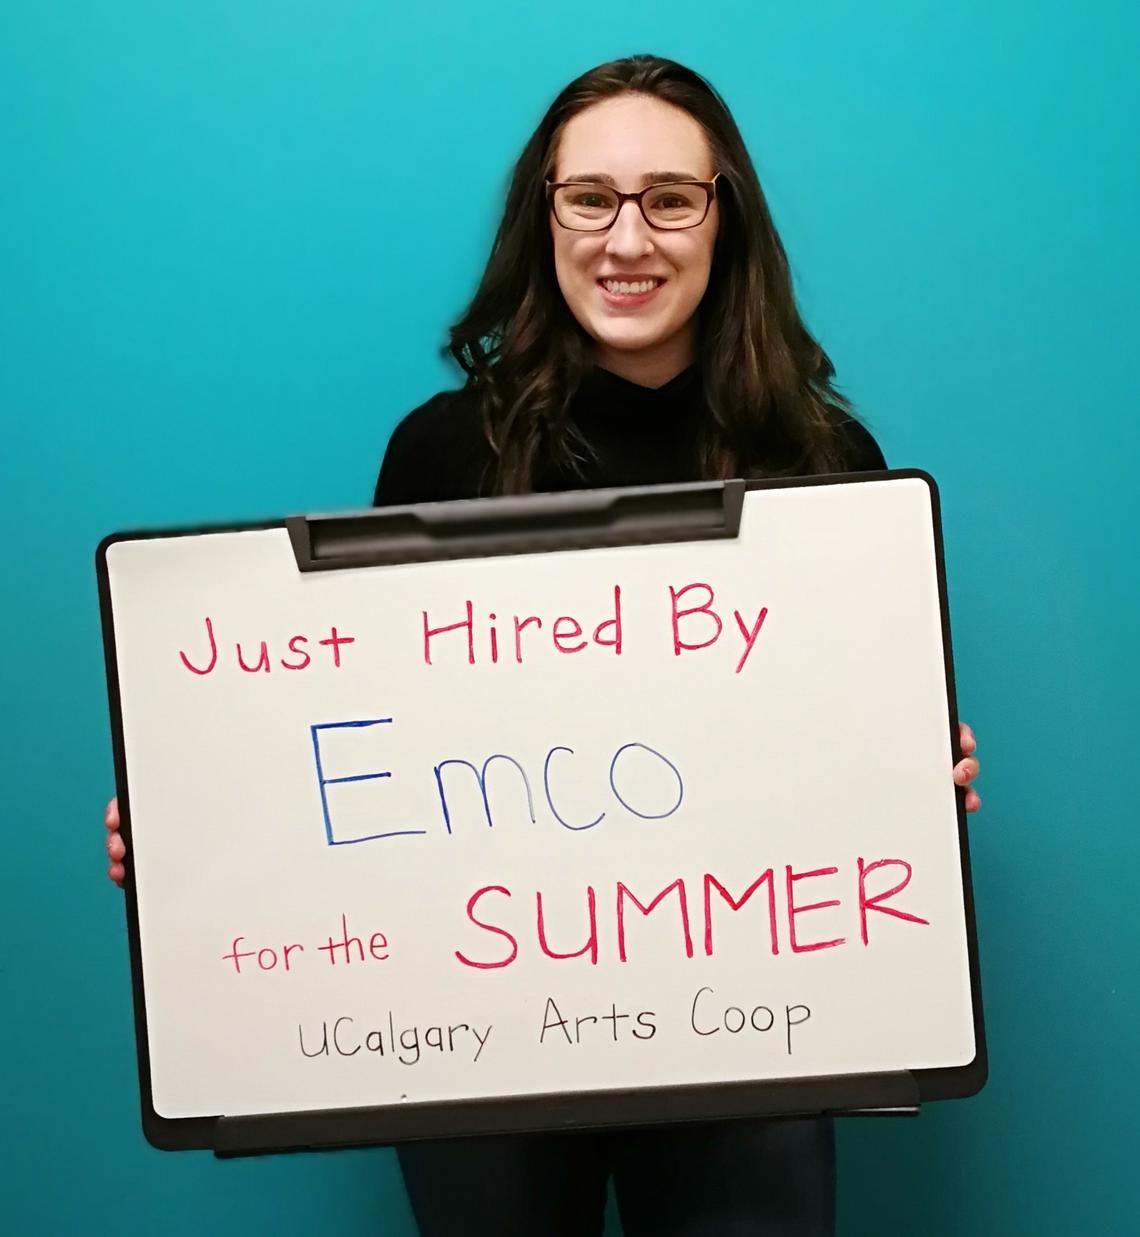 A student holds a signboard that reads "Just hired by Emco for the Summer"